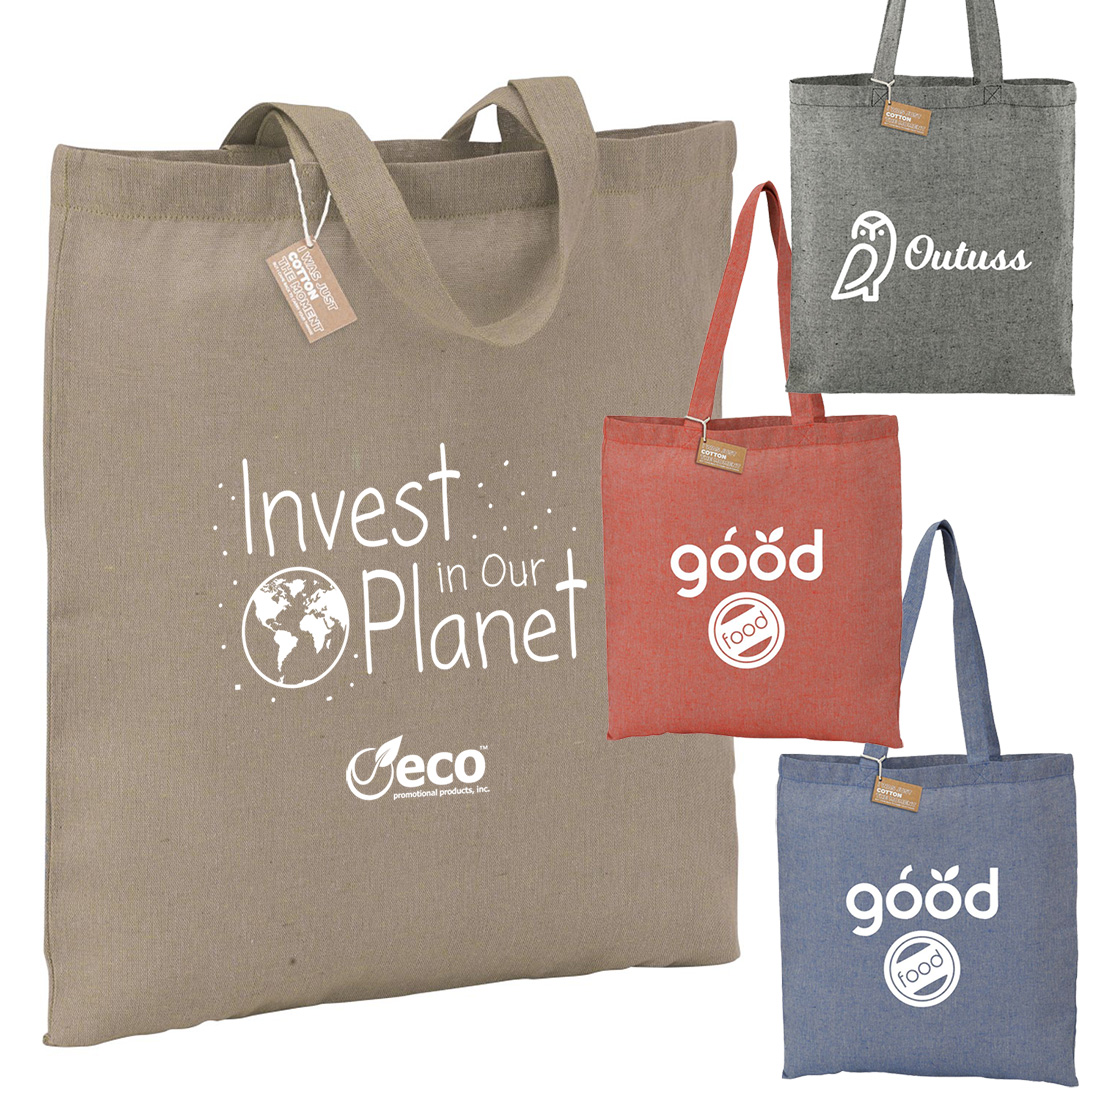 recycled cotton tote bags for Earth Day gifts